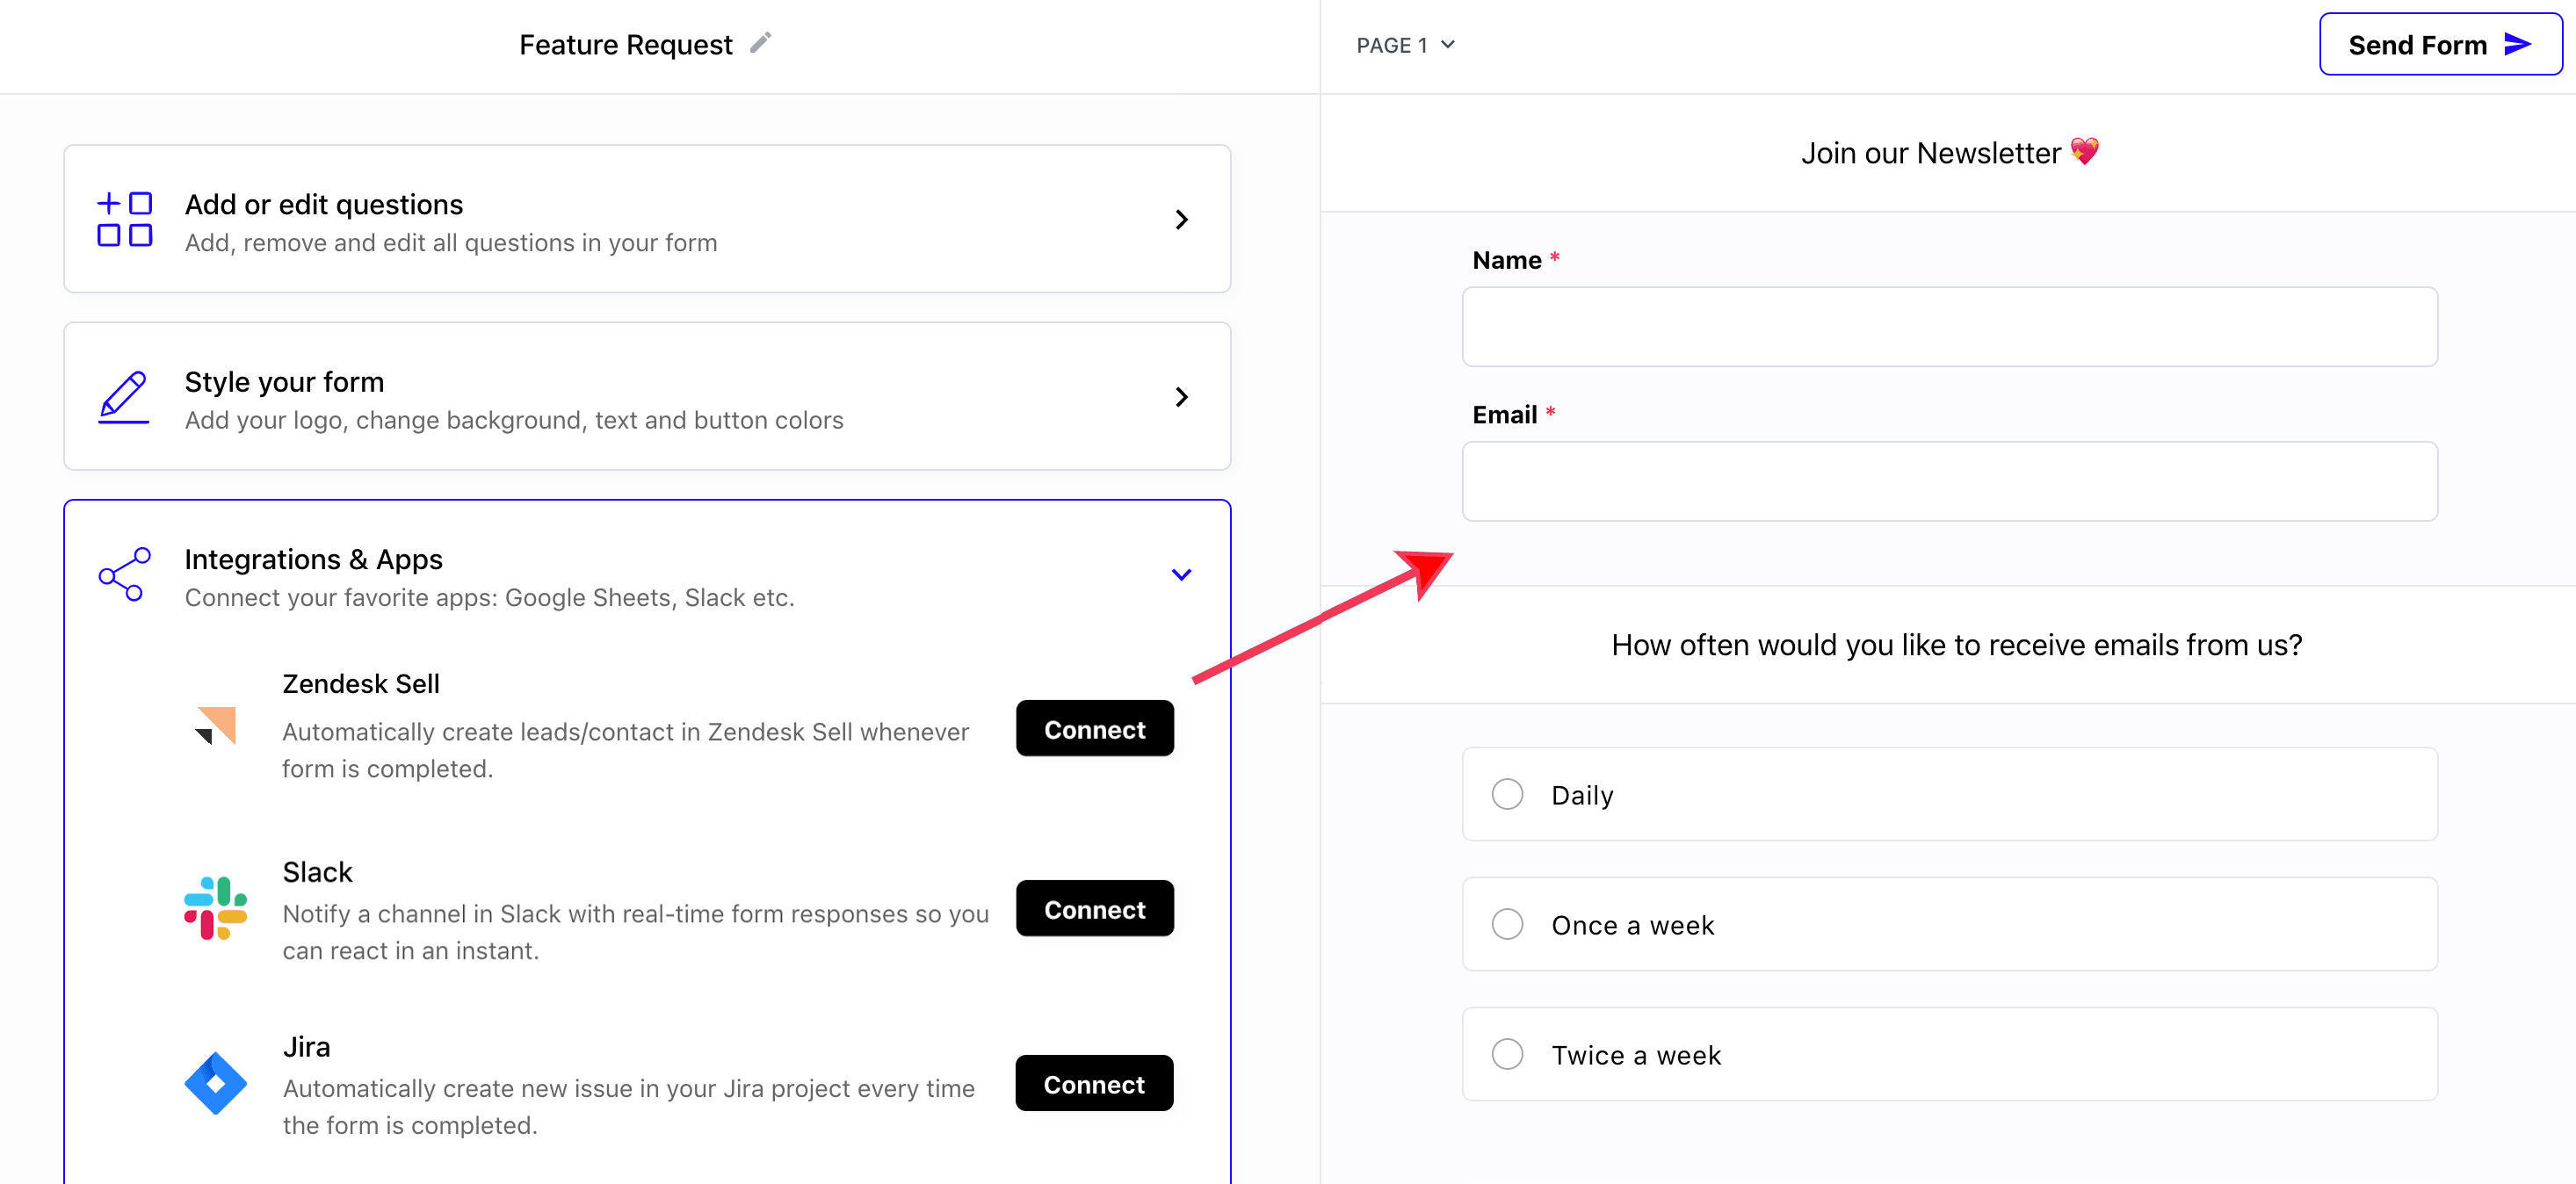 Connect form with Zendesk Sell